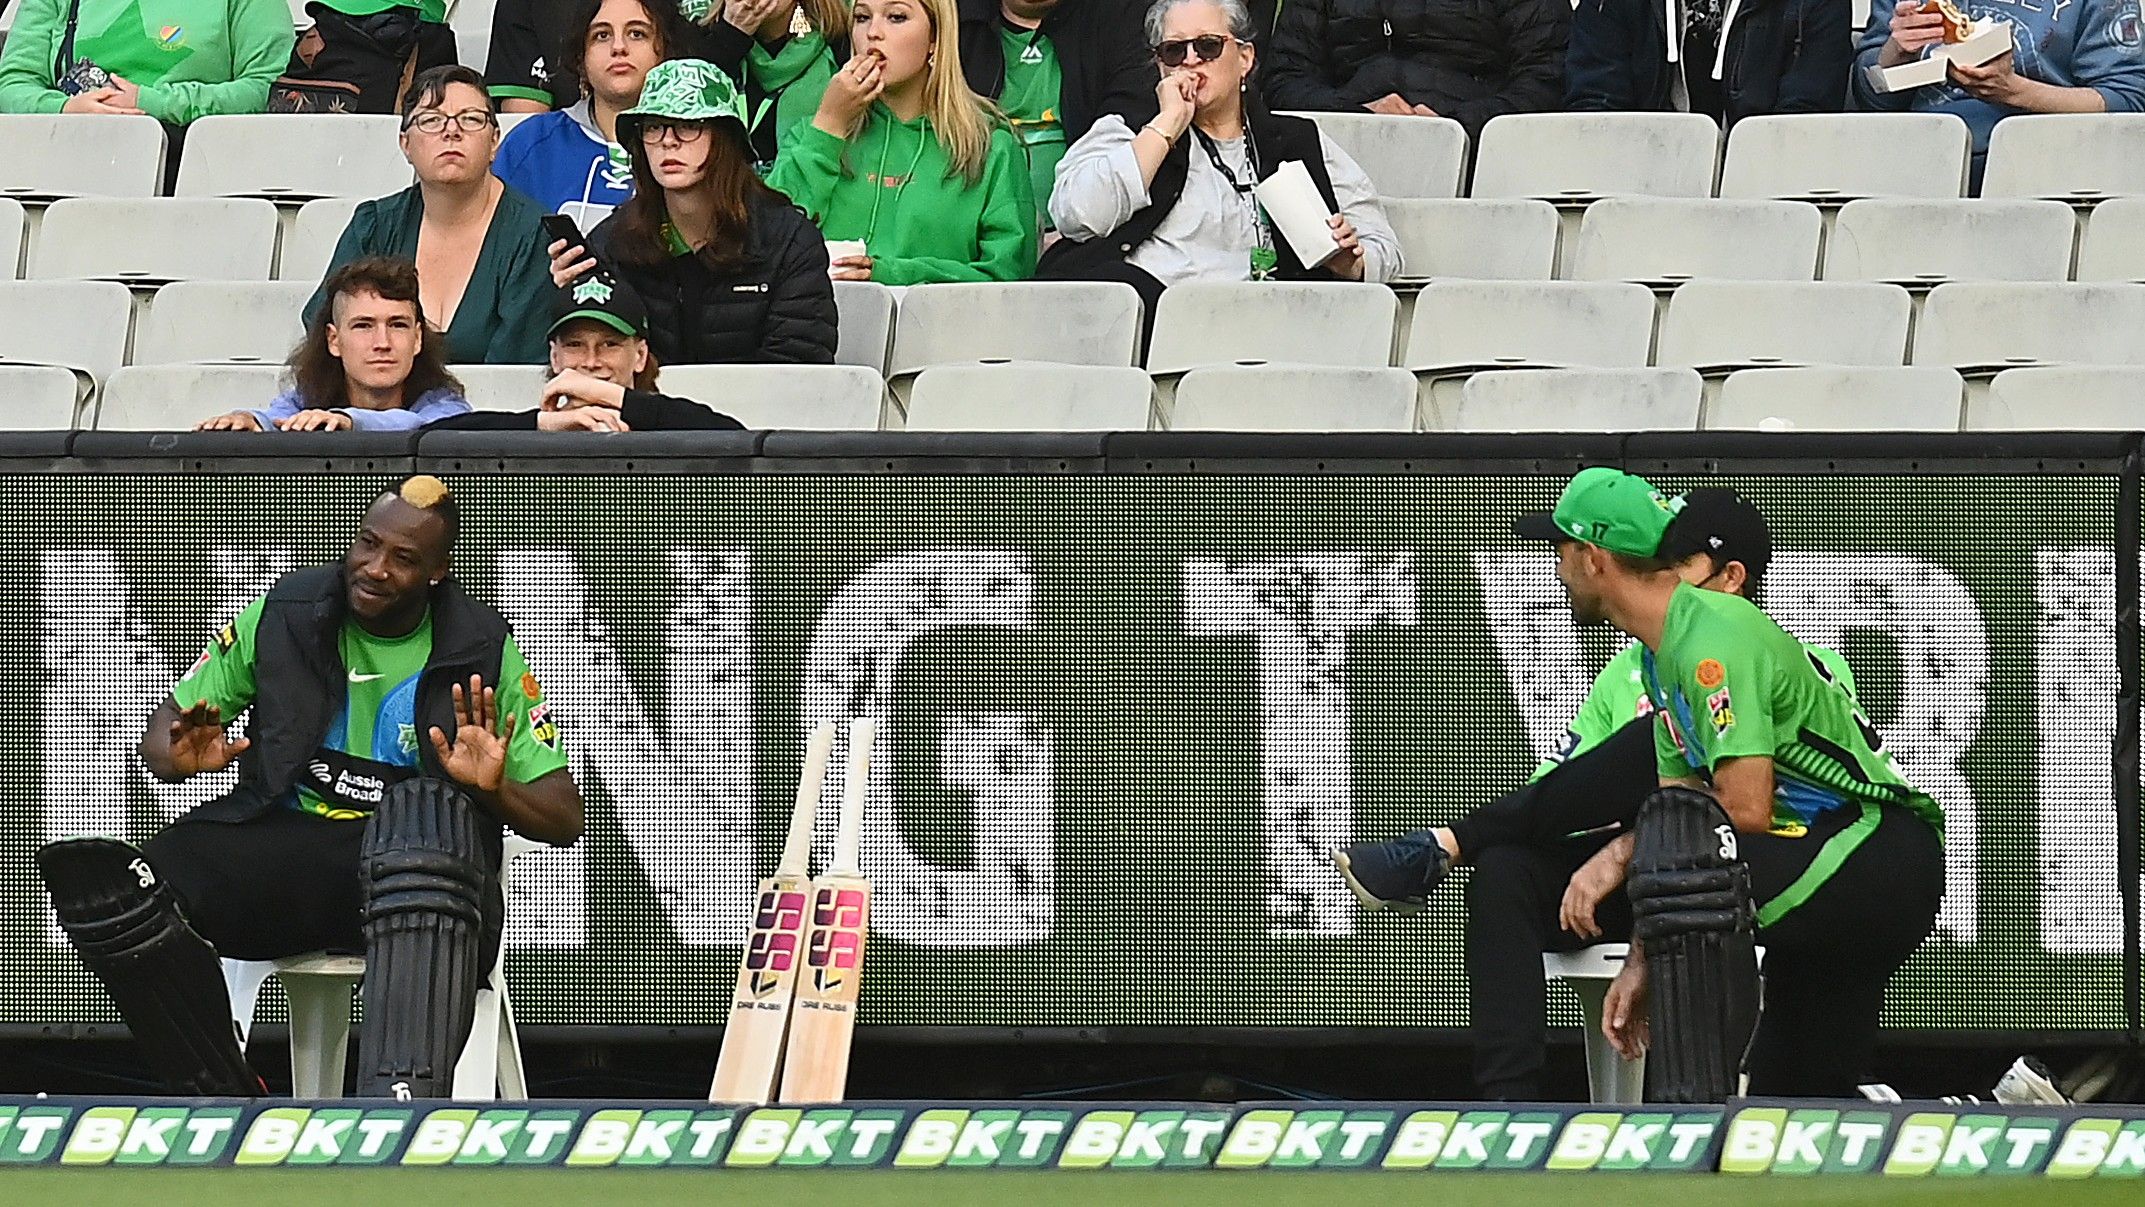 Melbourne Stars big-name signings subject to bizarre in-match COVID-19 protocols